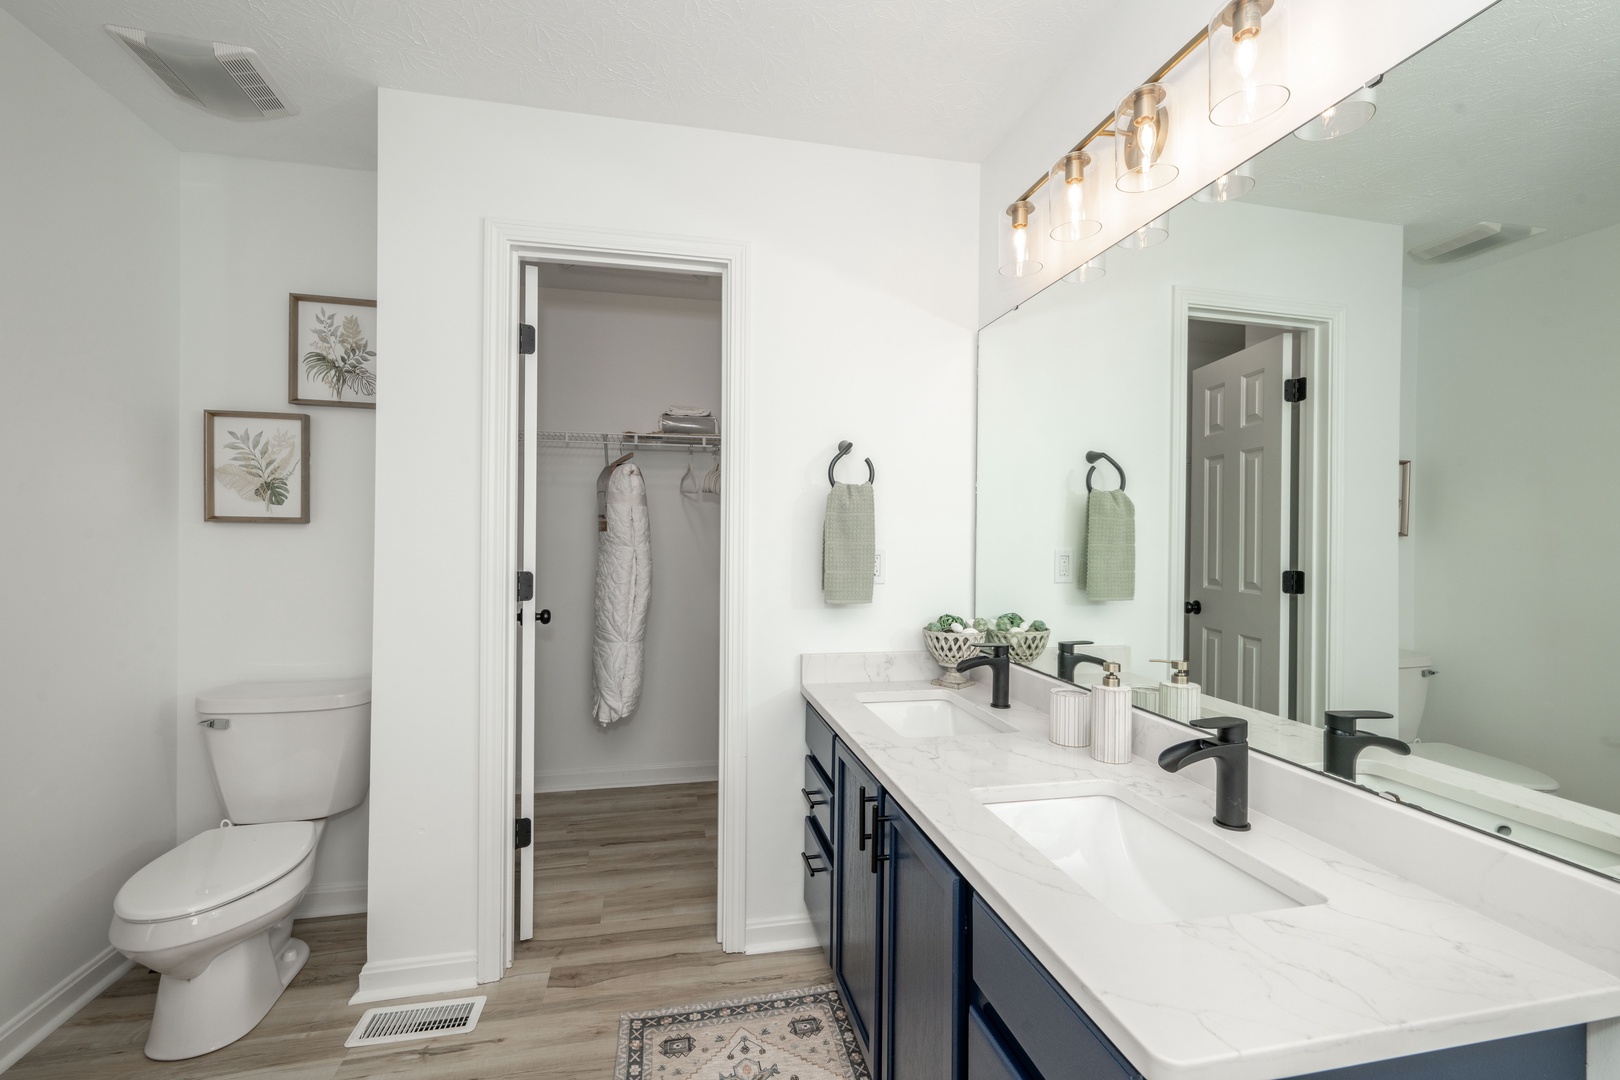 This full ensuite offers a double vanity, closet, soaking tub and shower